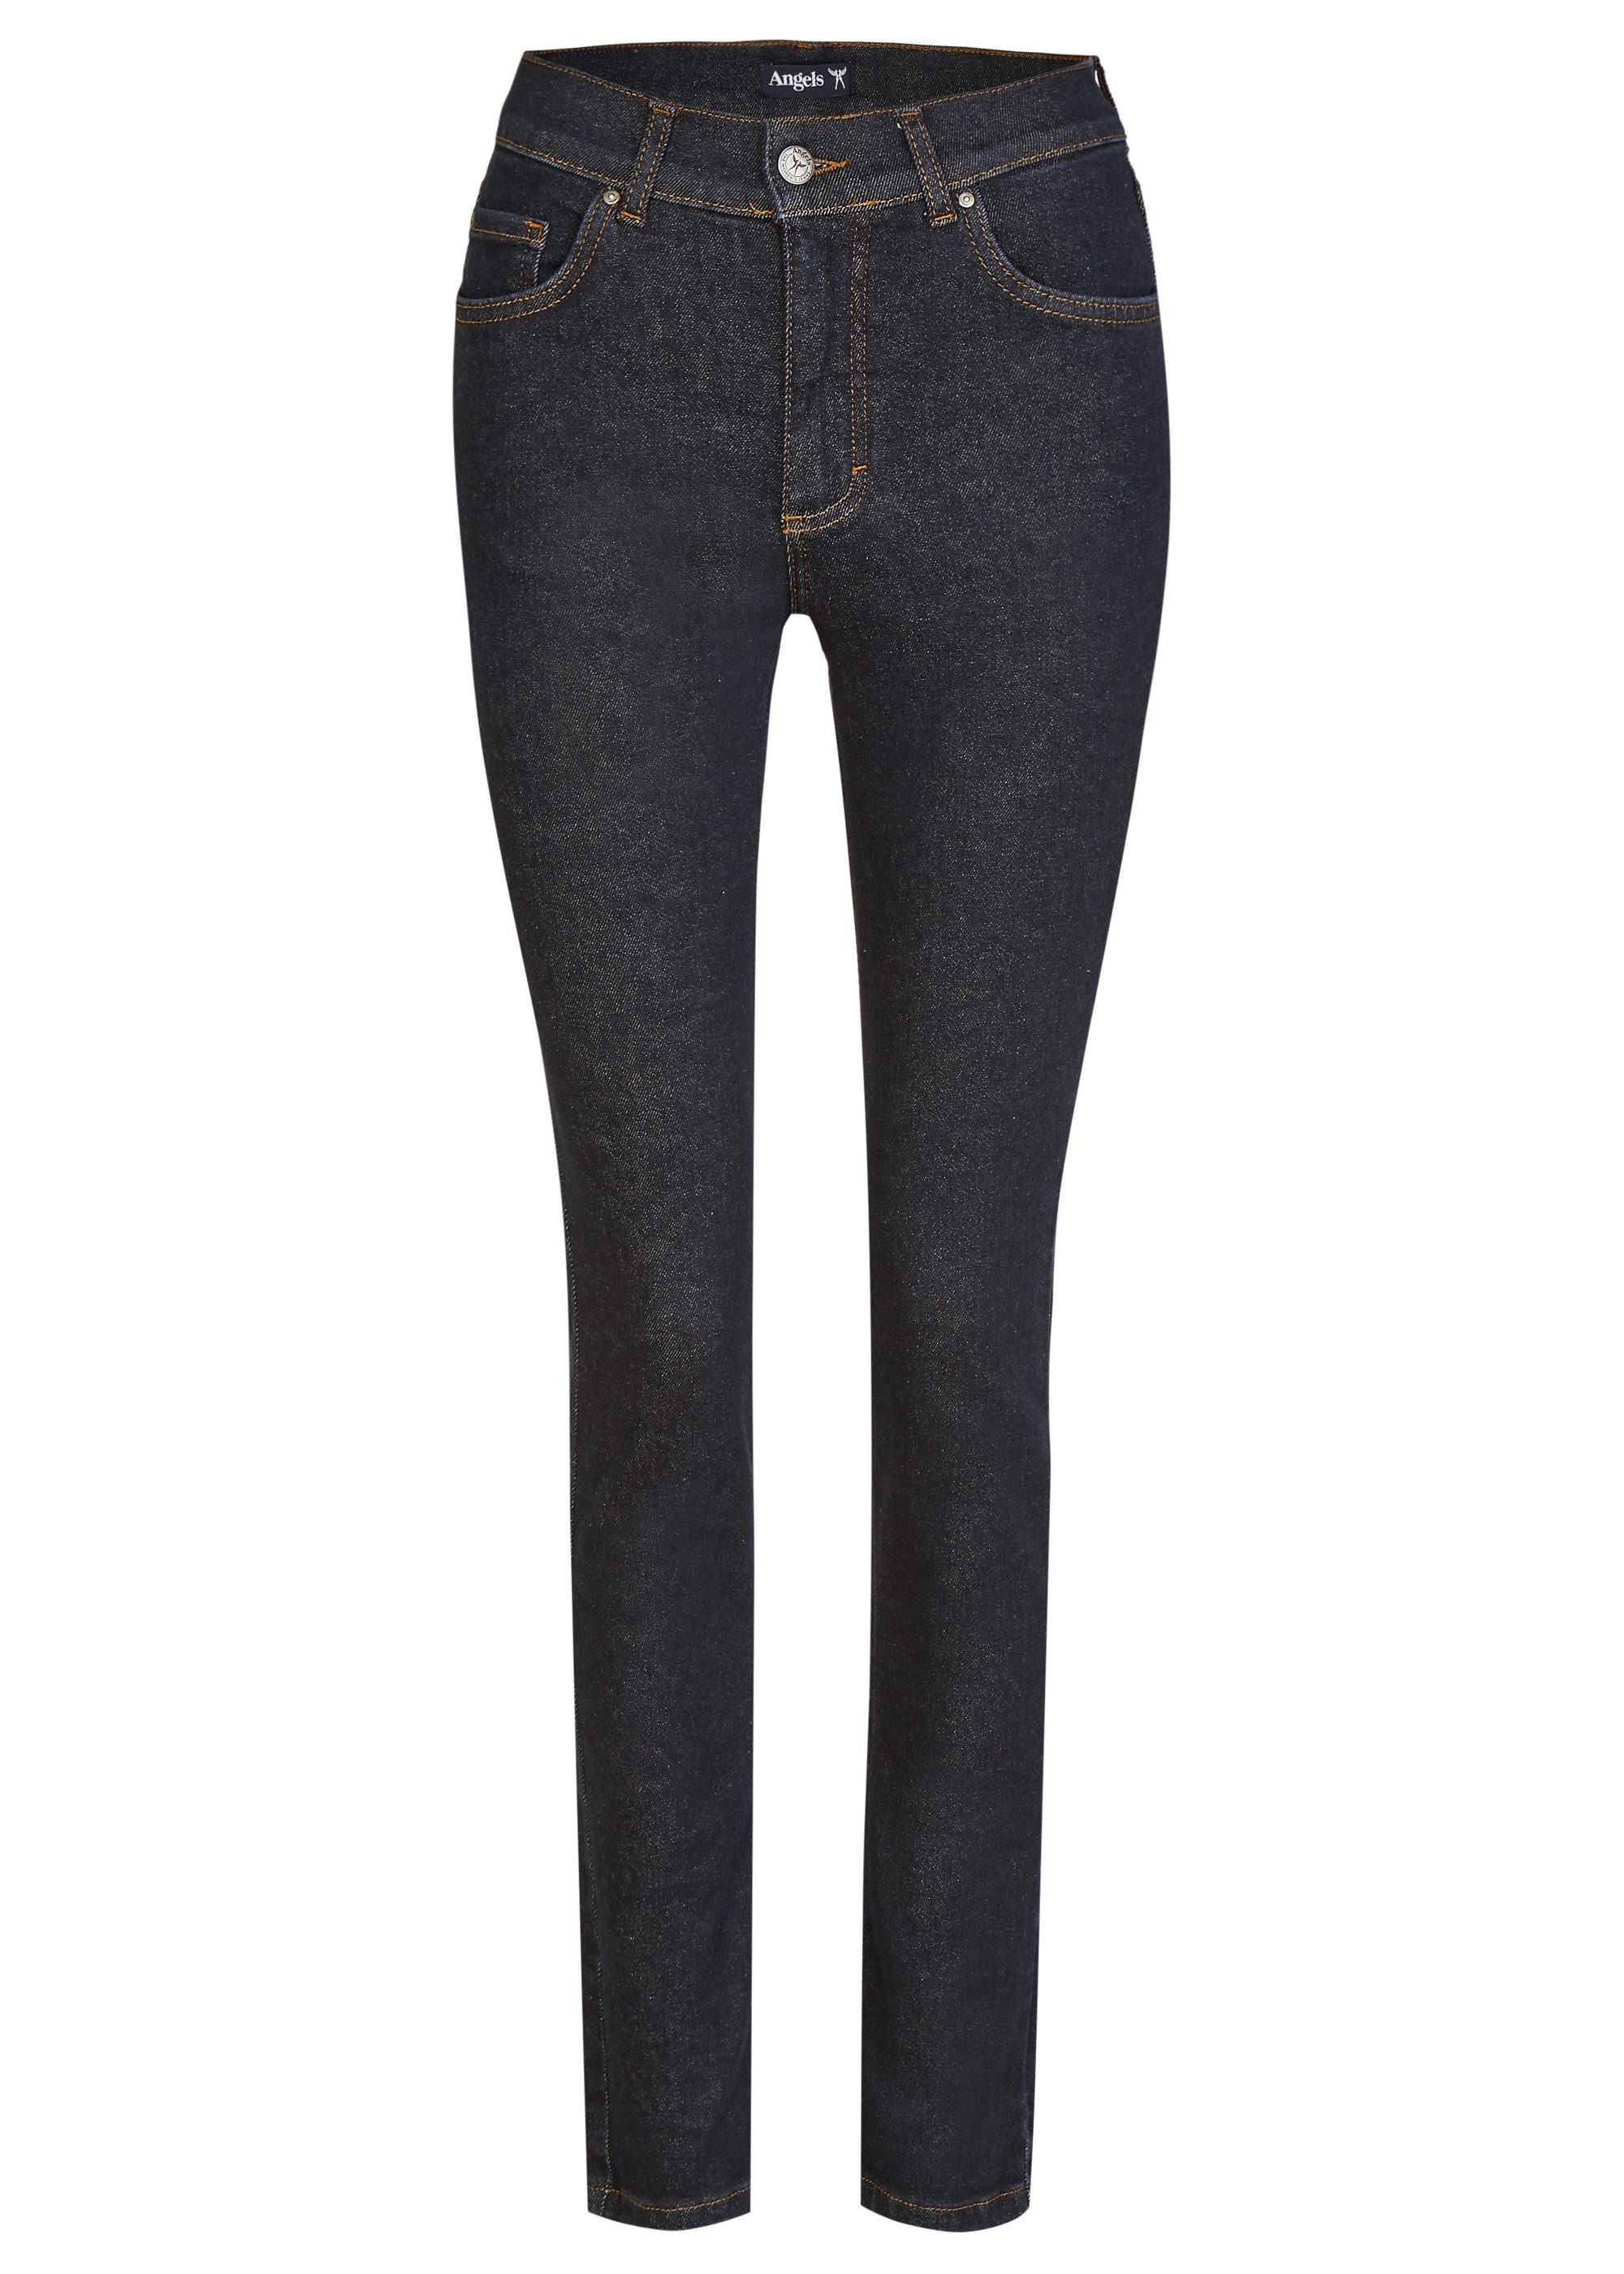 ANGELS 12.30 STRETCH ANGELS 325 Stretch-Jeans JEANS - night blue SKINNY